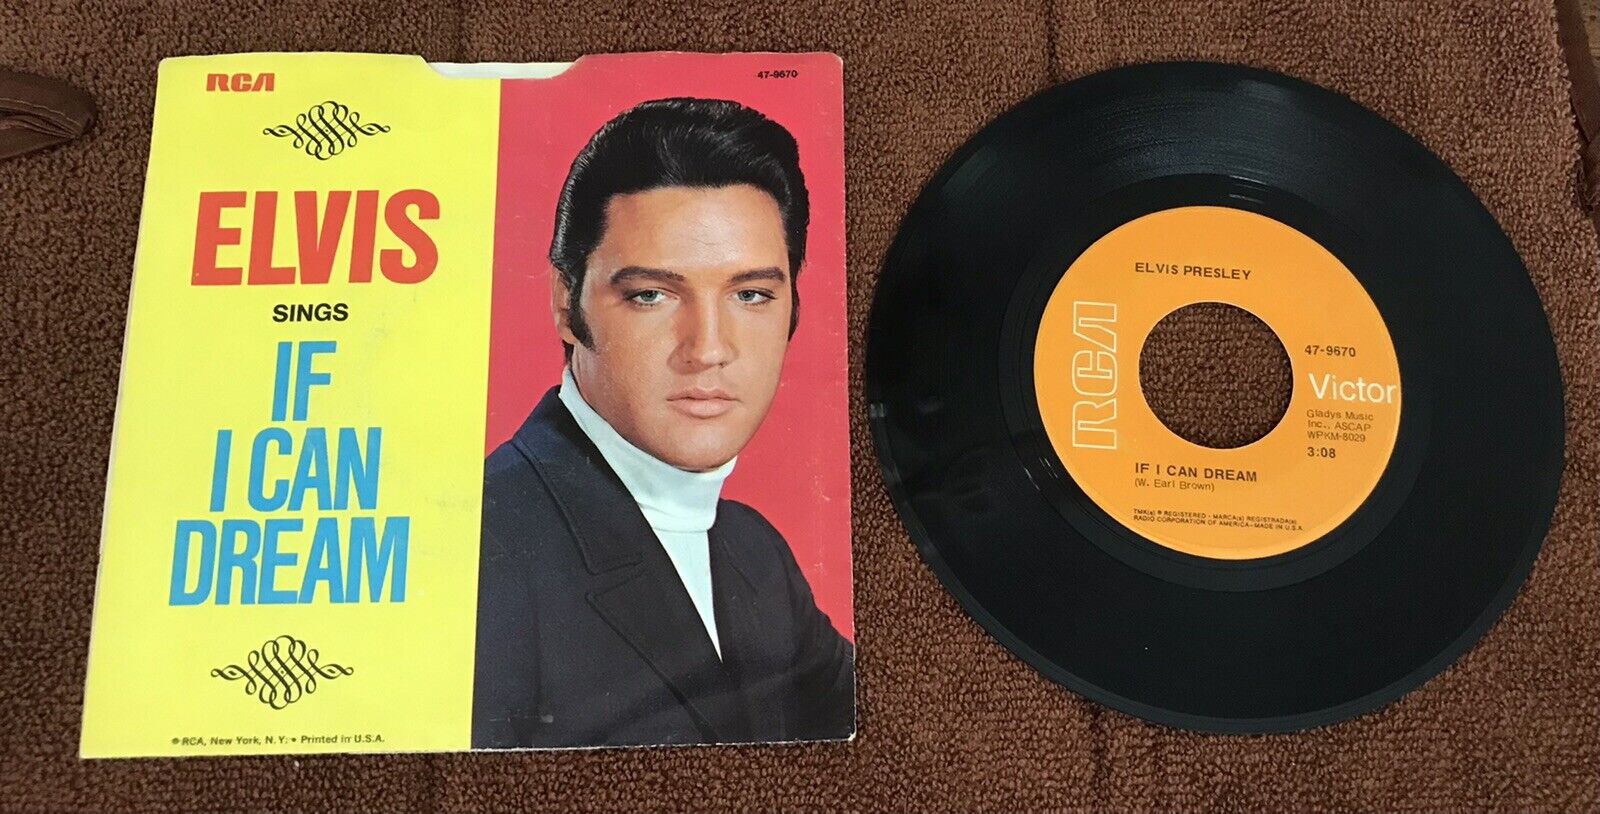 Elvis Presley If I Can Dream 45rpm Record And Picture Sleeve 47-9670.